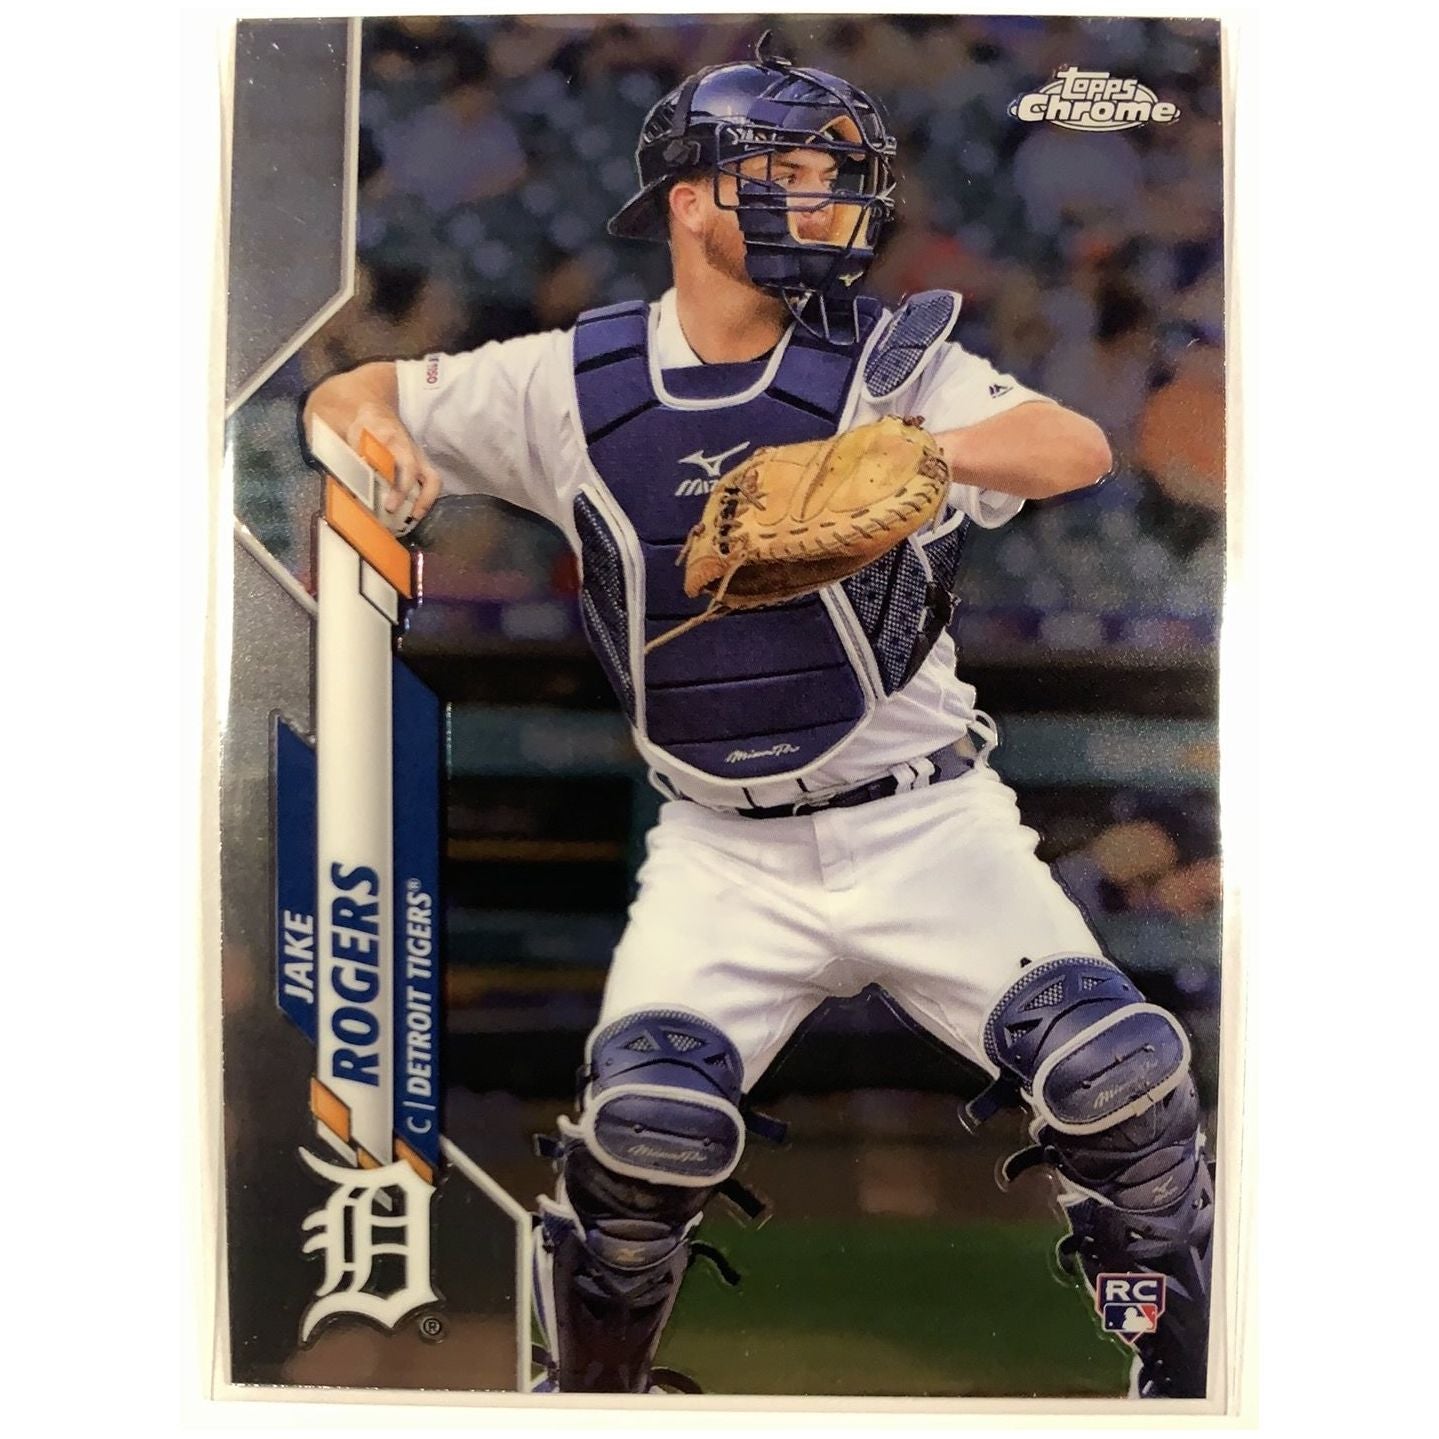  2020 Topps Chrome Jake Rogers RC  Local Legends Cards & Collectibles